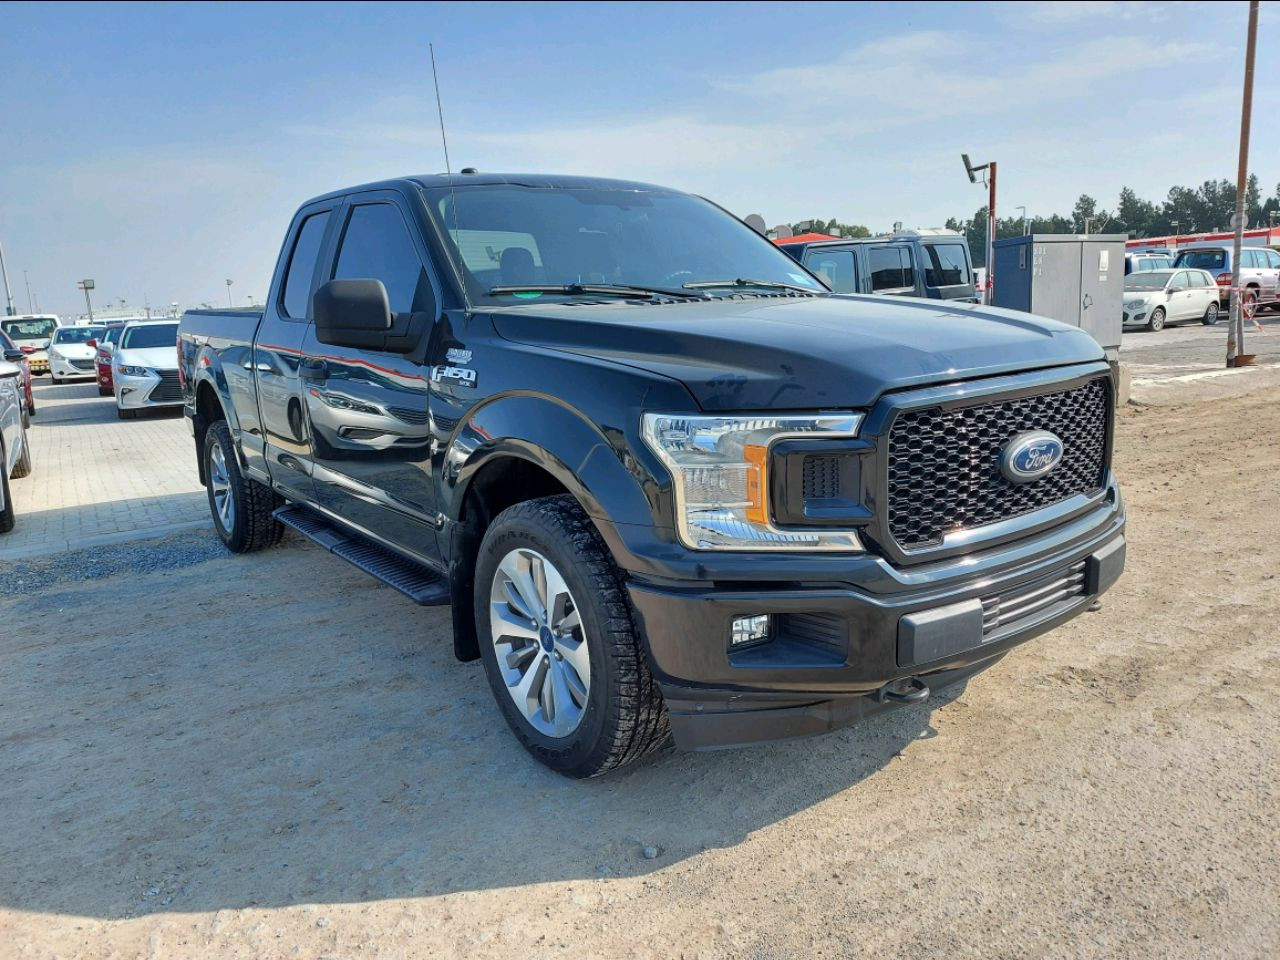 Ford F-Series Pickup 2018 AED 85,000, Good condition, Full Option, US Spec, Fog Lights, Negotiable